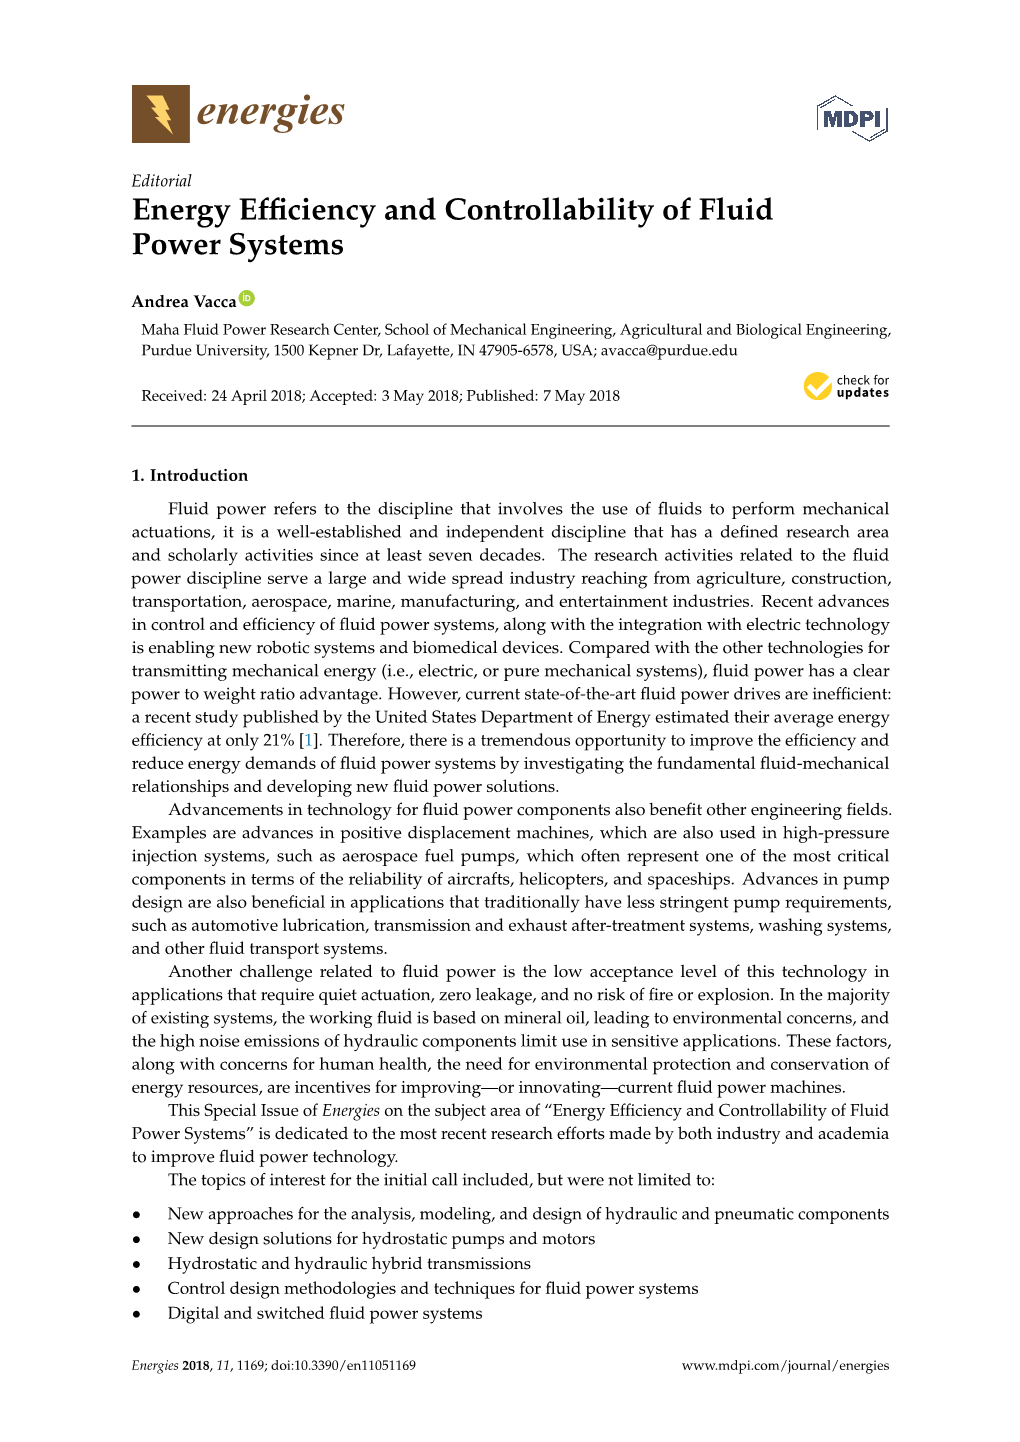 Energy Efficiency and Controllability of Fluid Power Systems